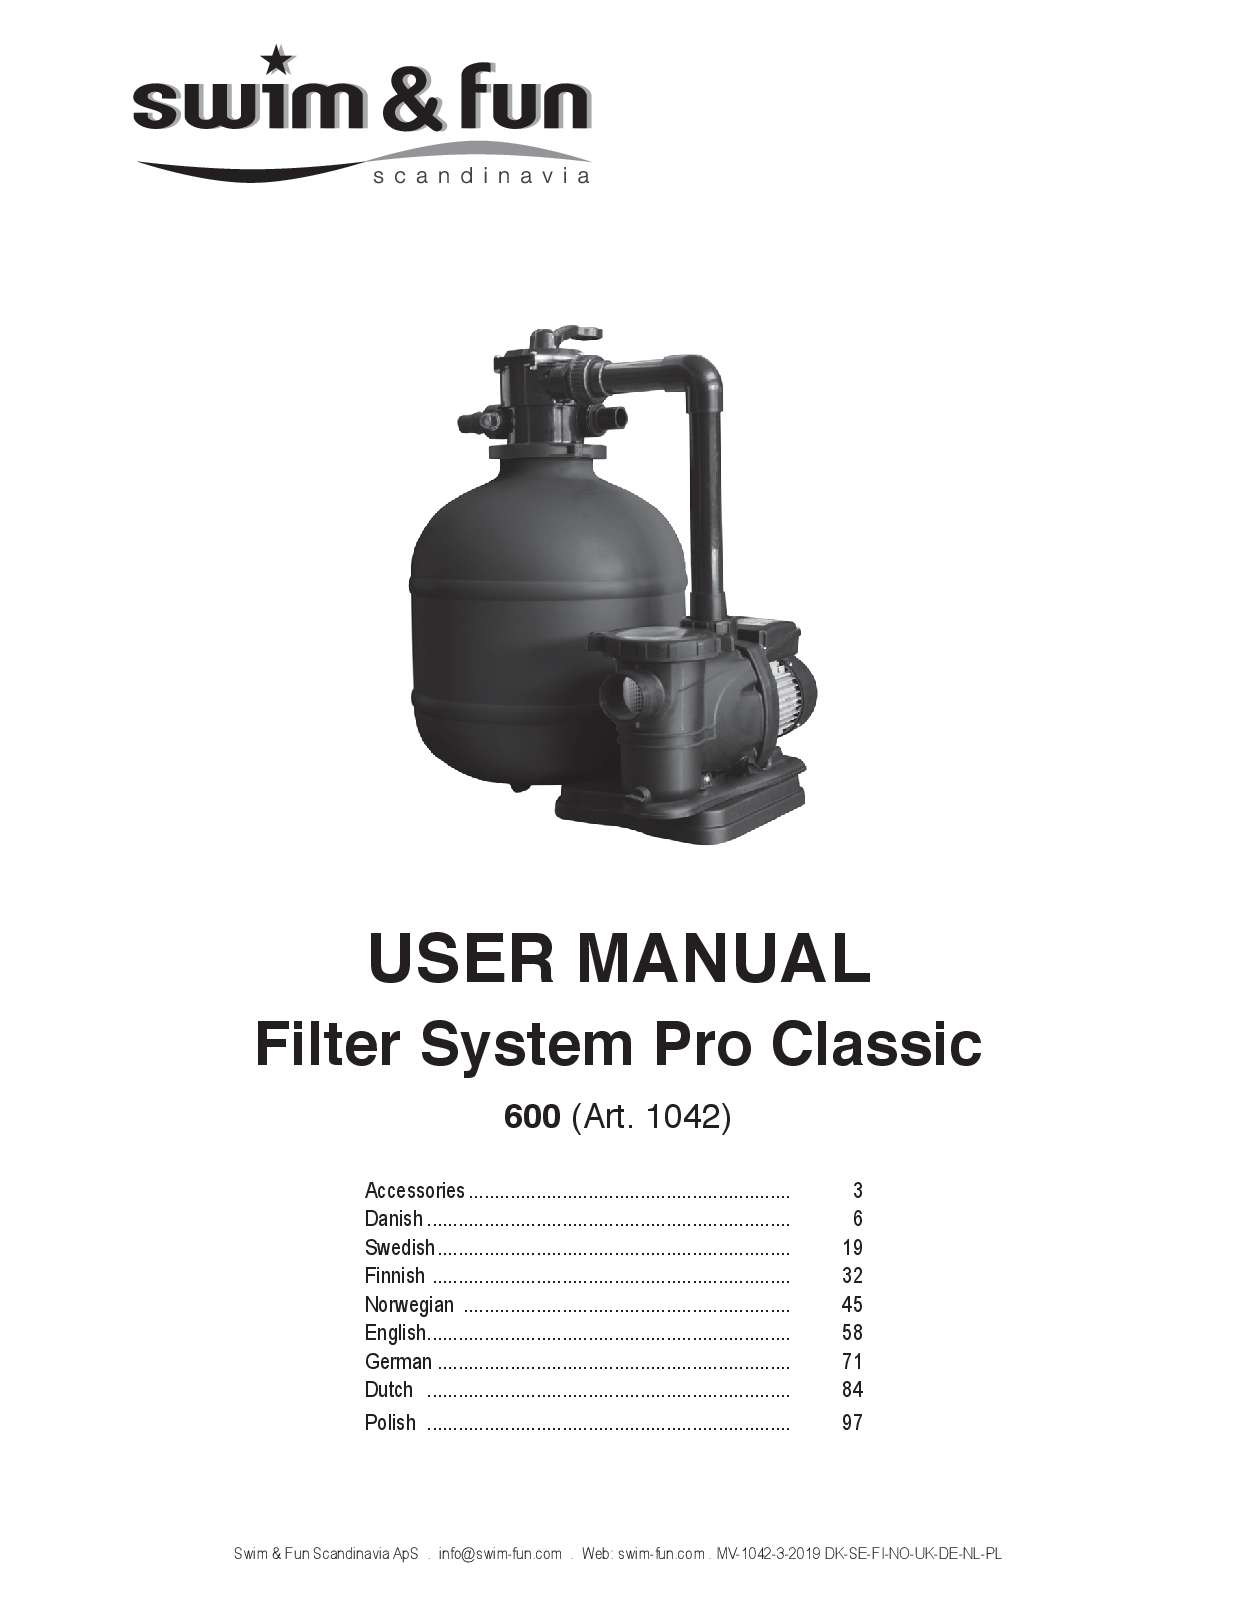 Filter System Pro Classic 600